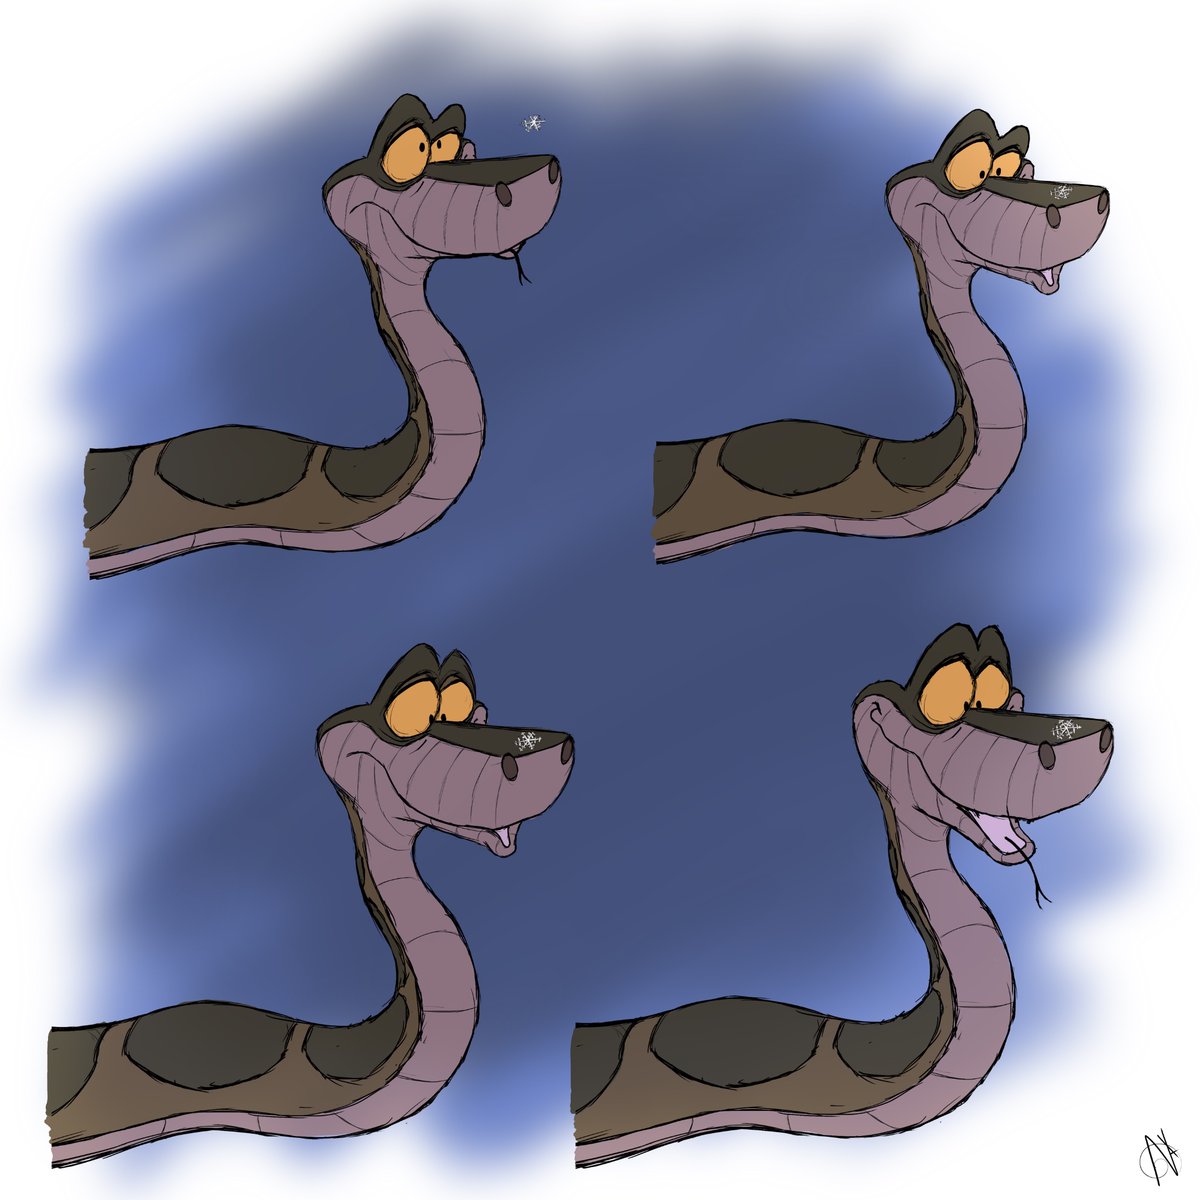 Happy Winter Sssssolsssticce everyone and happy Friday, and the very happiest of holidays as well! Snow doesn’t really happen in this jungle, but a single snowflake fell in jussst the right place. Hehe Kaa’s not sure what to make of it, but he seems a bit amused at the least😊